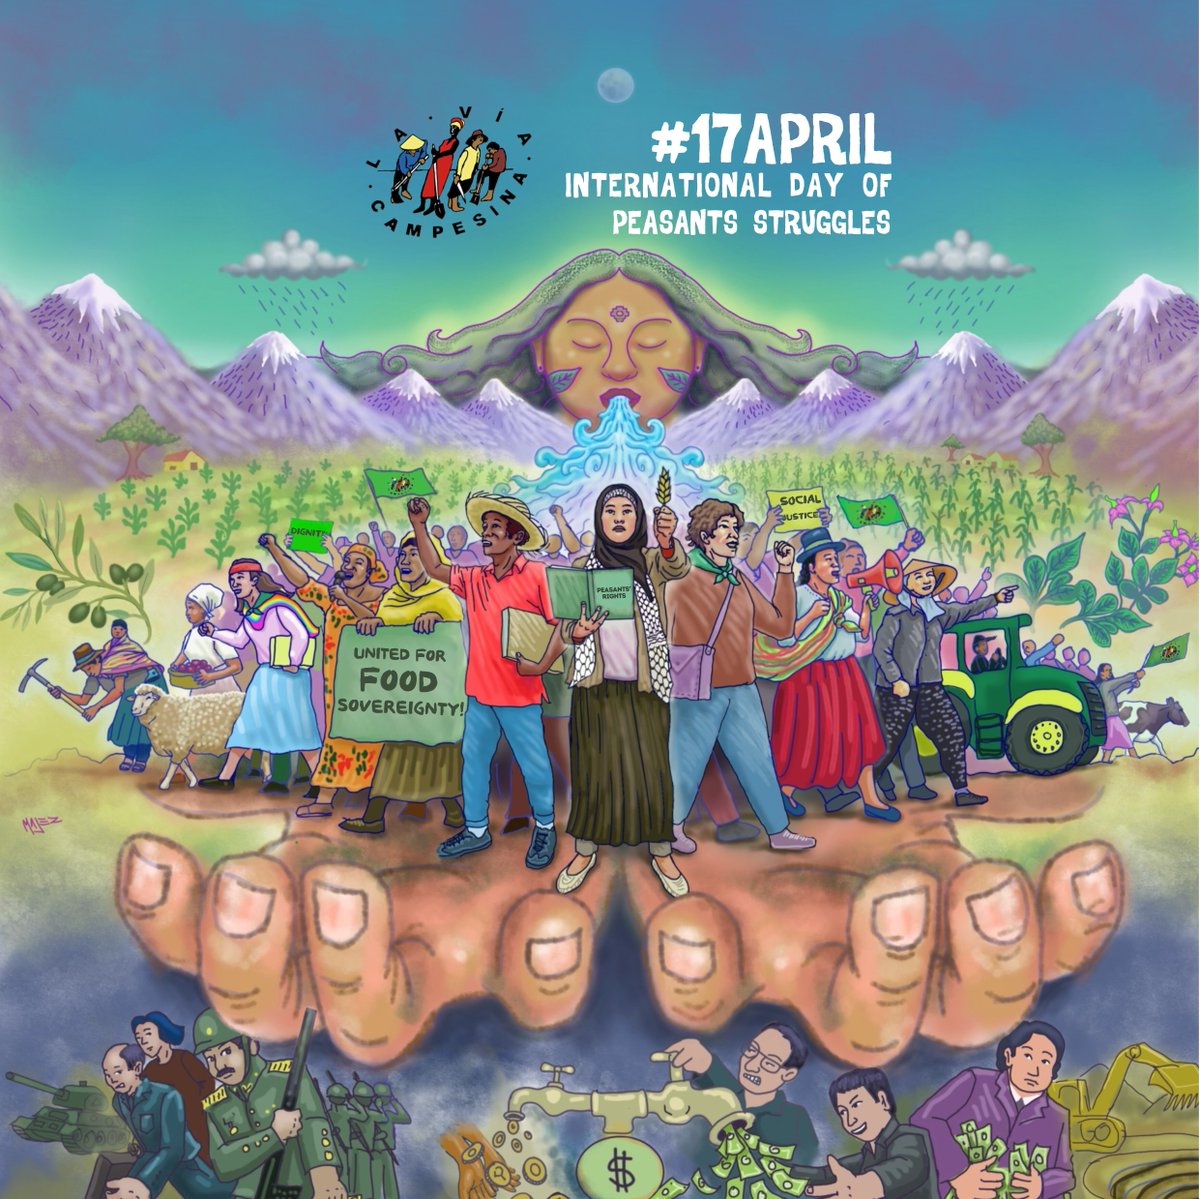 ❤️‍🔥With solemn but steadfast hearts, we join @via_campesina in commemorating the Eldorado do Carajás massacre of landless peasants by Brazilian military police that occurred on this day 28 years ago. More about the International Day of Peasant Struggles: viacampesina.org/en/event/april…